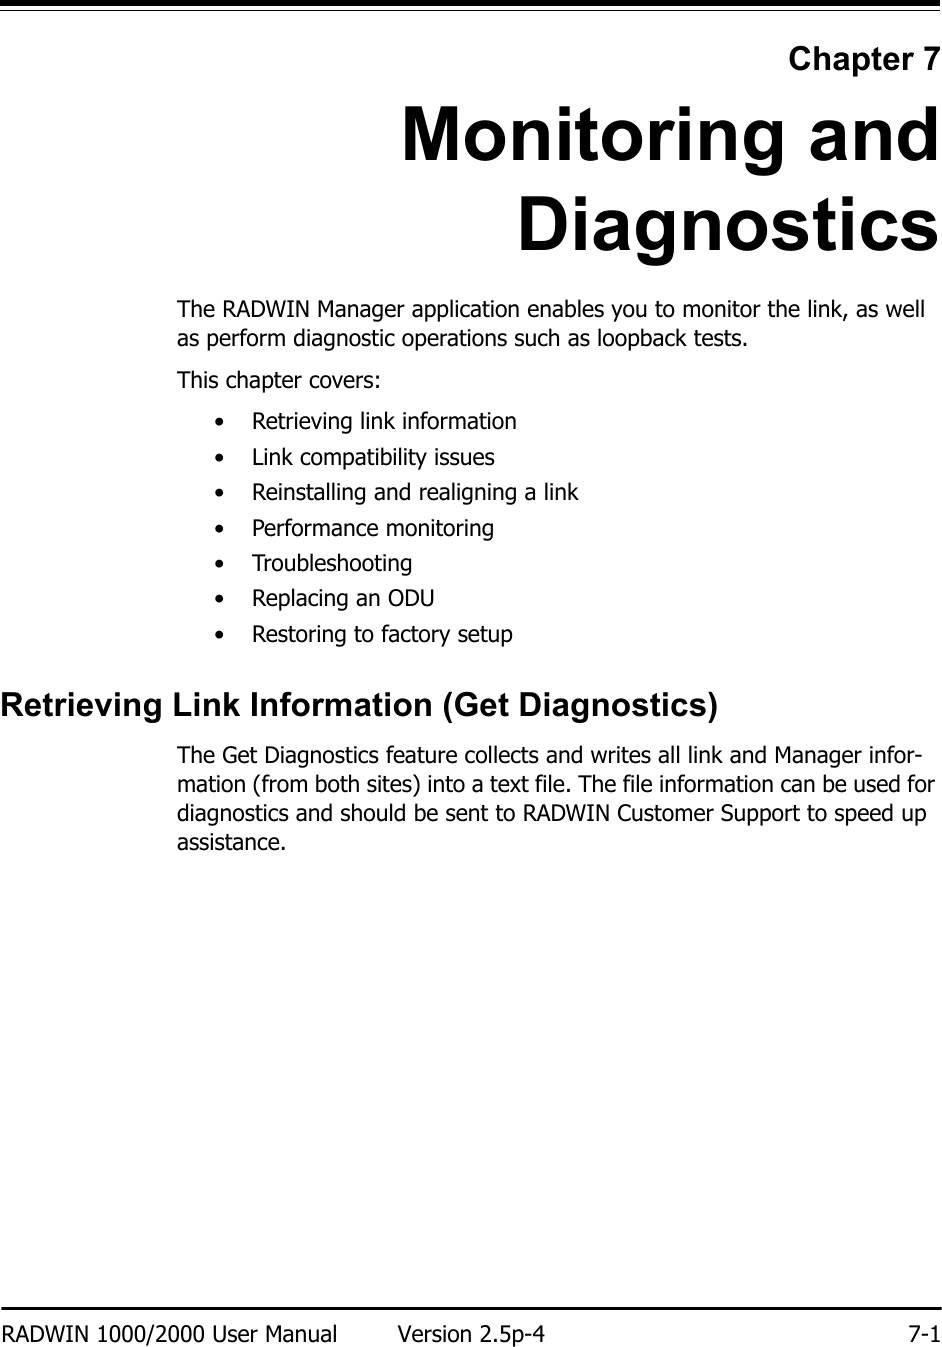 RADWIN 1000/2000 User Manual Version 2.5p-4 7-1Chapter 7Monitoring andDiagnosticsThe RADWIN Manager application enables you to monitor the link, as well as perform diagnostic operations such as loopback tests. This chapter covers:• Retrieving link information• Link compatibility issues• Reinstalling and realigning a link• Performance monitoring• Troubleshooting•Replacing an ODU• Restoring to factory setupRetrieving Link Information (Get Diagnostics)The Get Diagnostics feature collects and writes all link and Manager infor-mation (from both sites) into a text file. The file information can be used for diagnostics and should be sent to RADWIN Customer Support to speed up assistance.